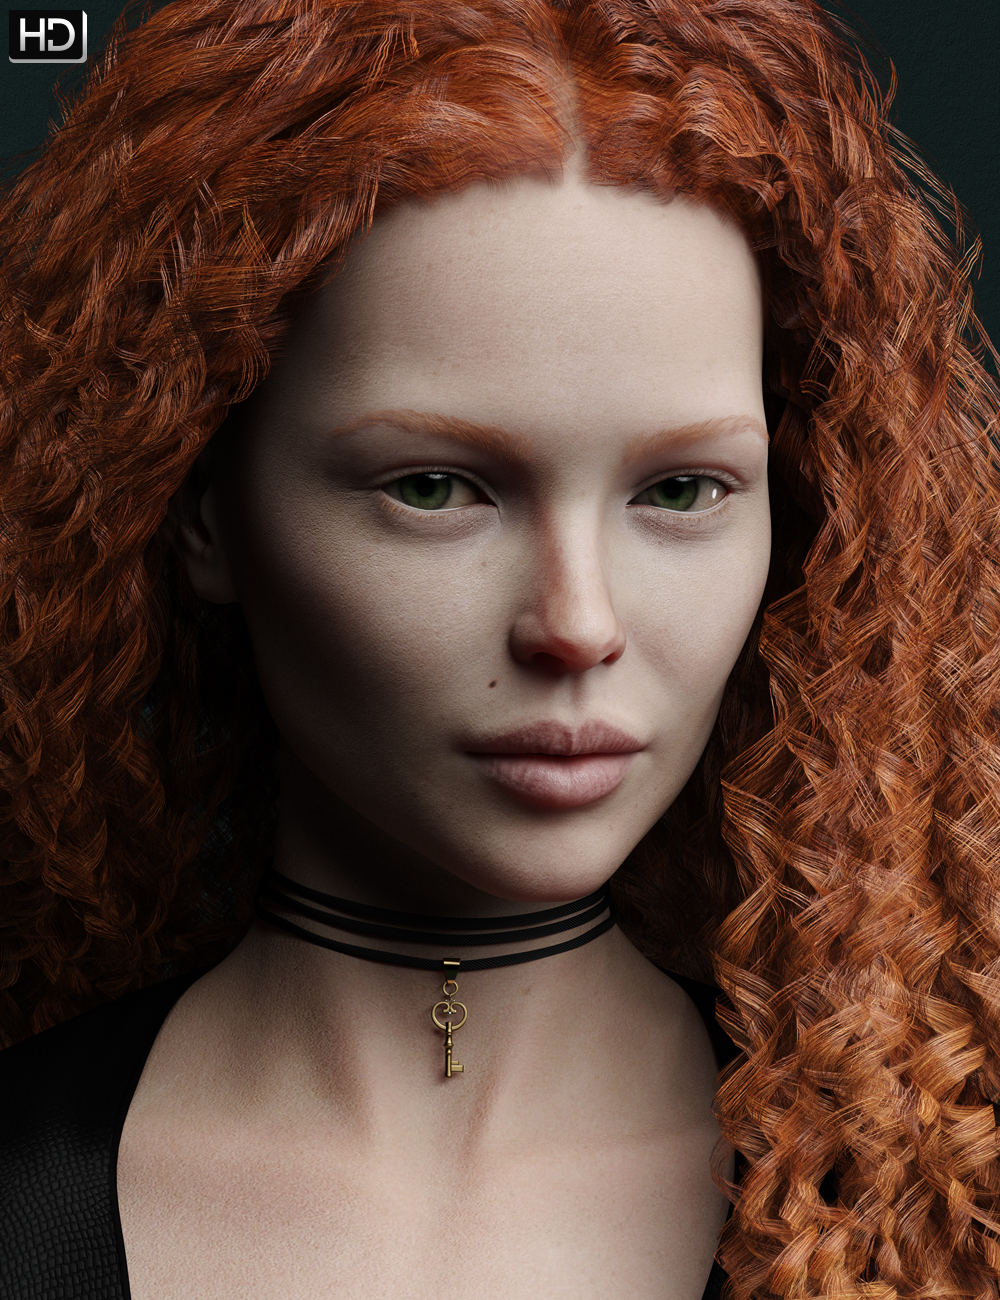 Shawna HD for Victoria 8 by: Emrys, 3D Models by Daz 3D